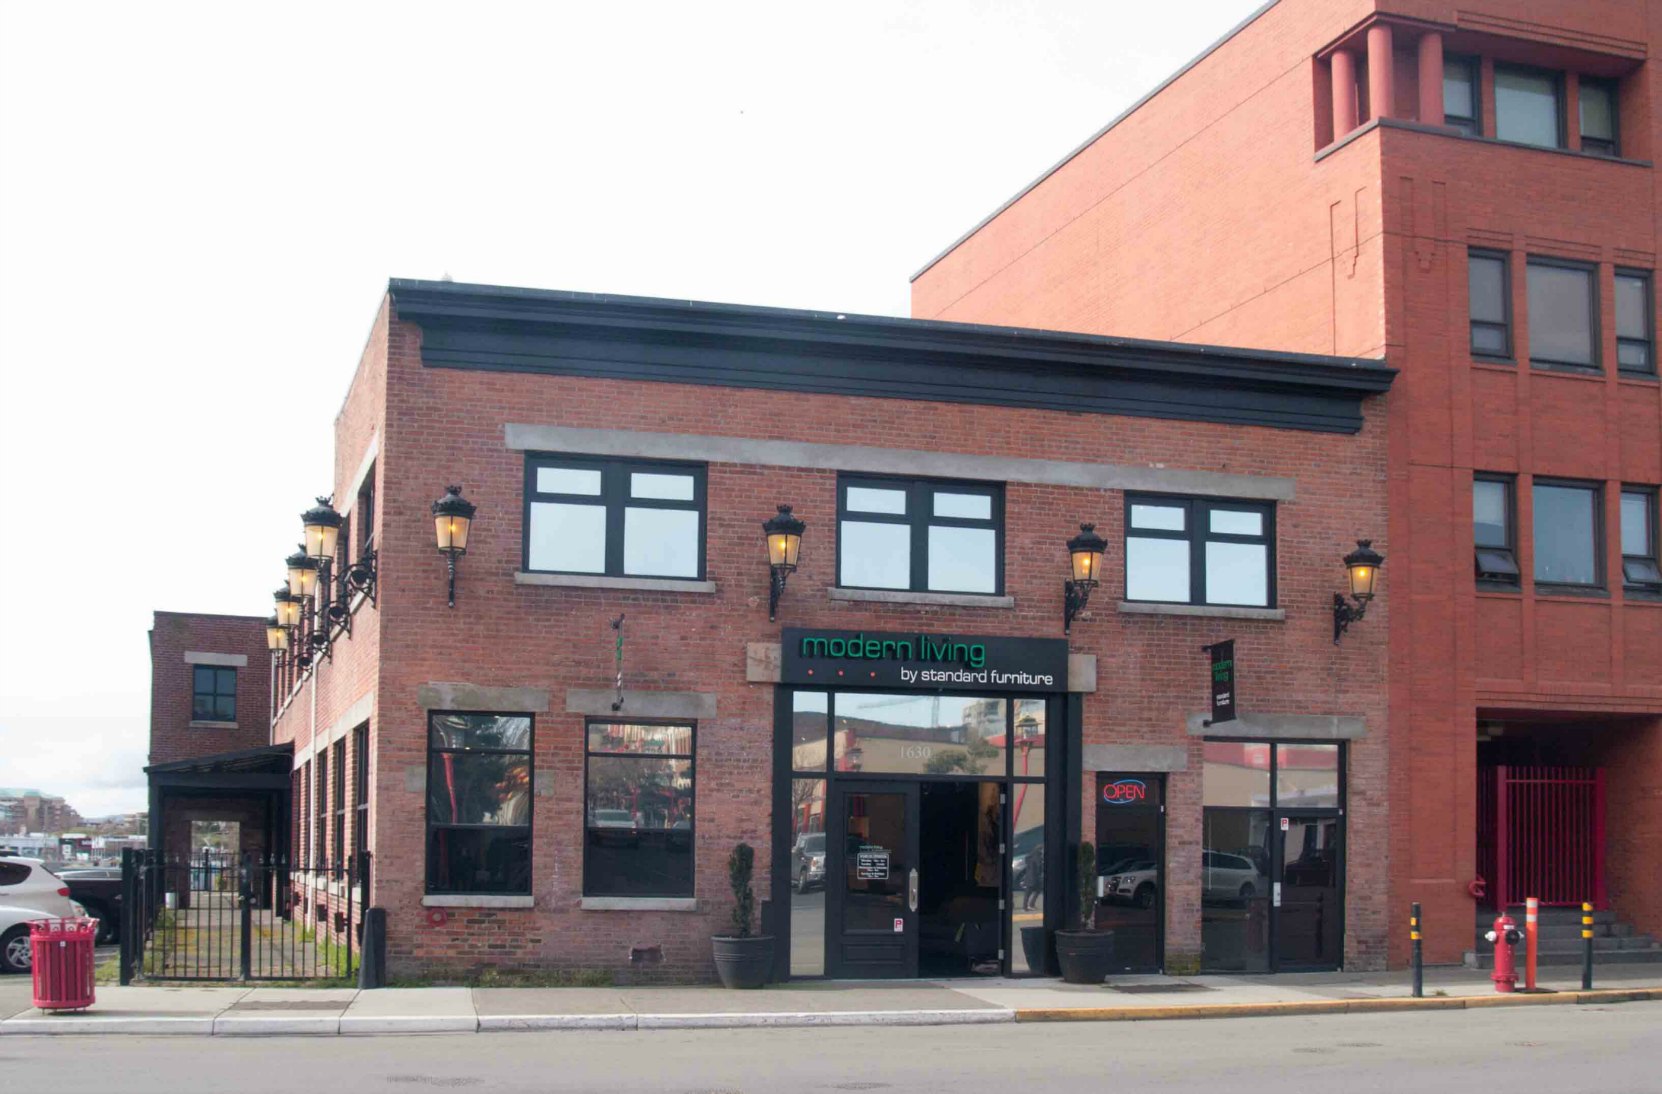 This building at 1630 Store Street was built in 1912 as a machine shop.